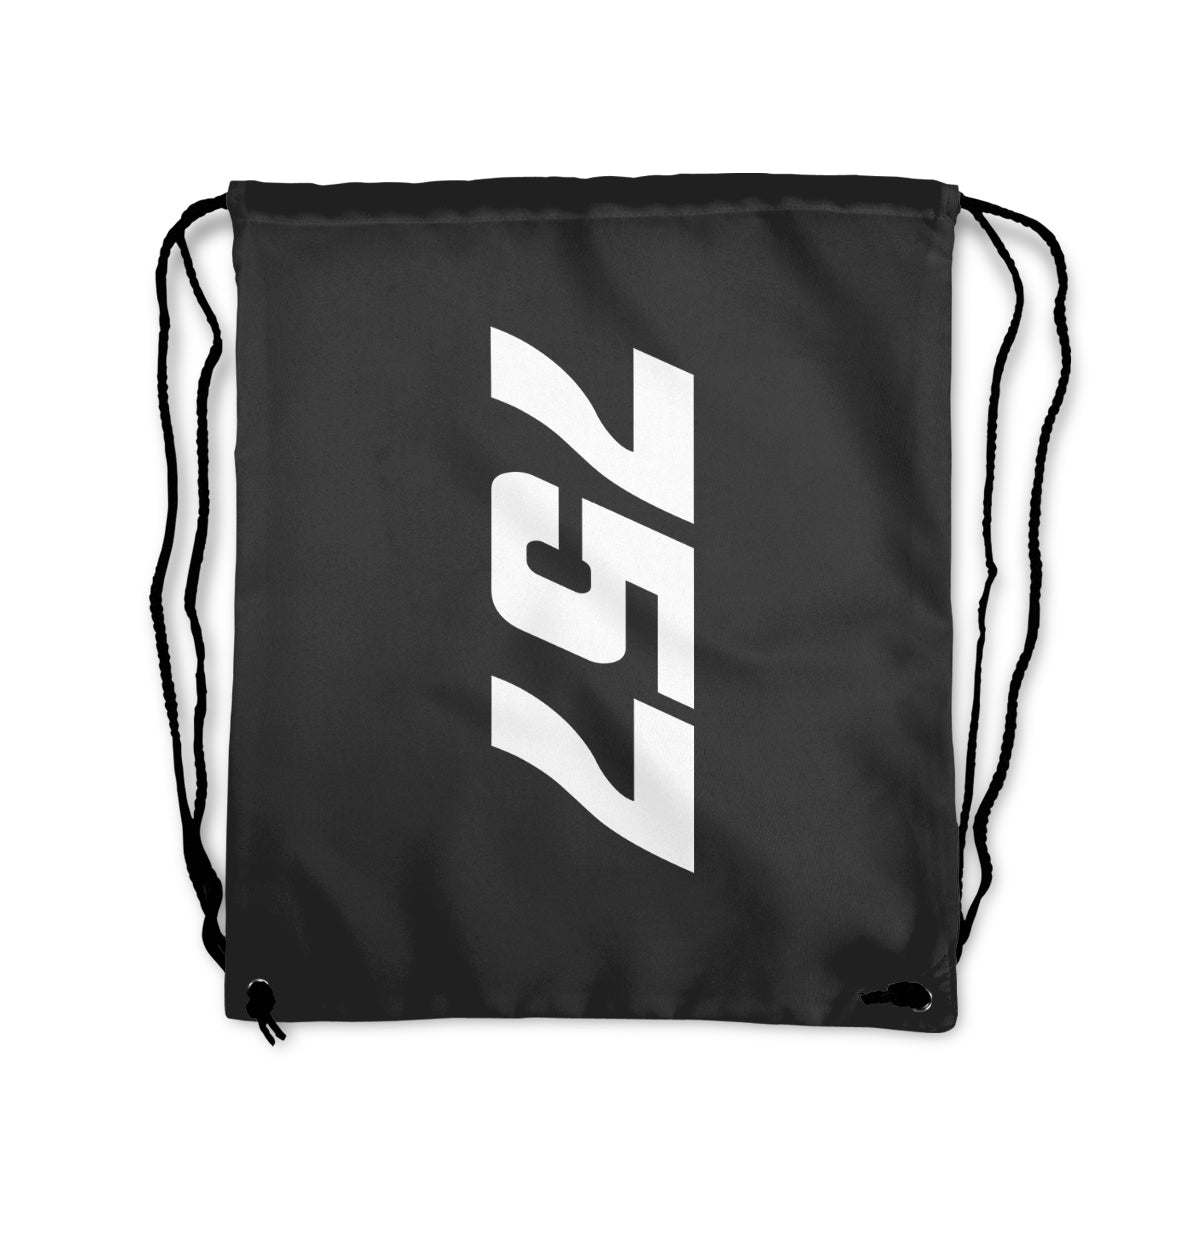 Boeing 757 Text Designed Drawstring Bags